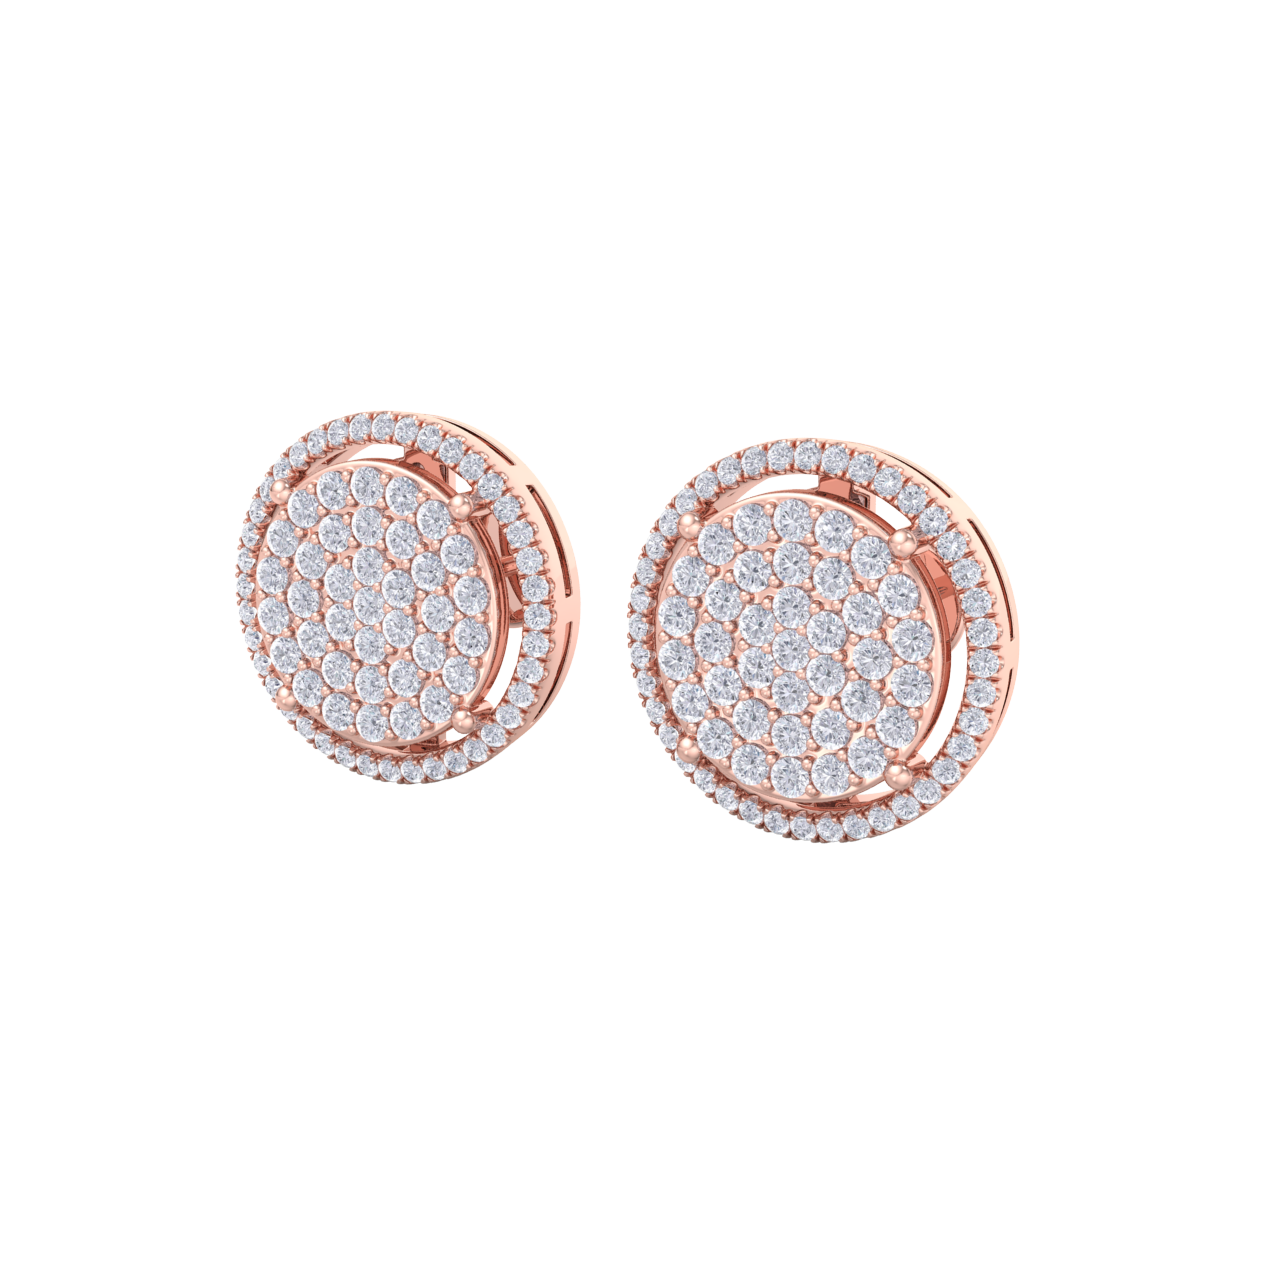 Halo stud earrings in rose gold with white diamonds of 1.11 ct in weight